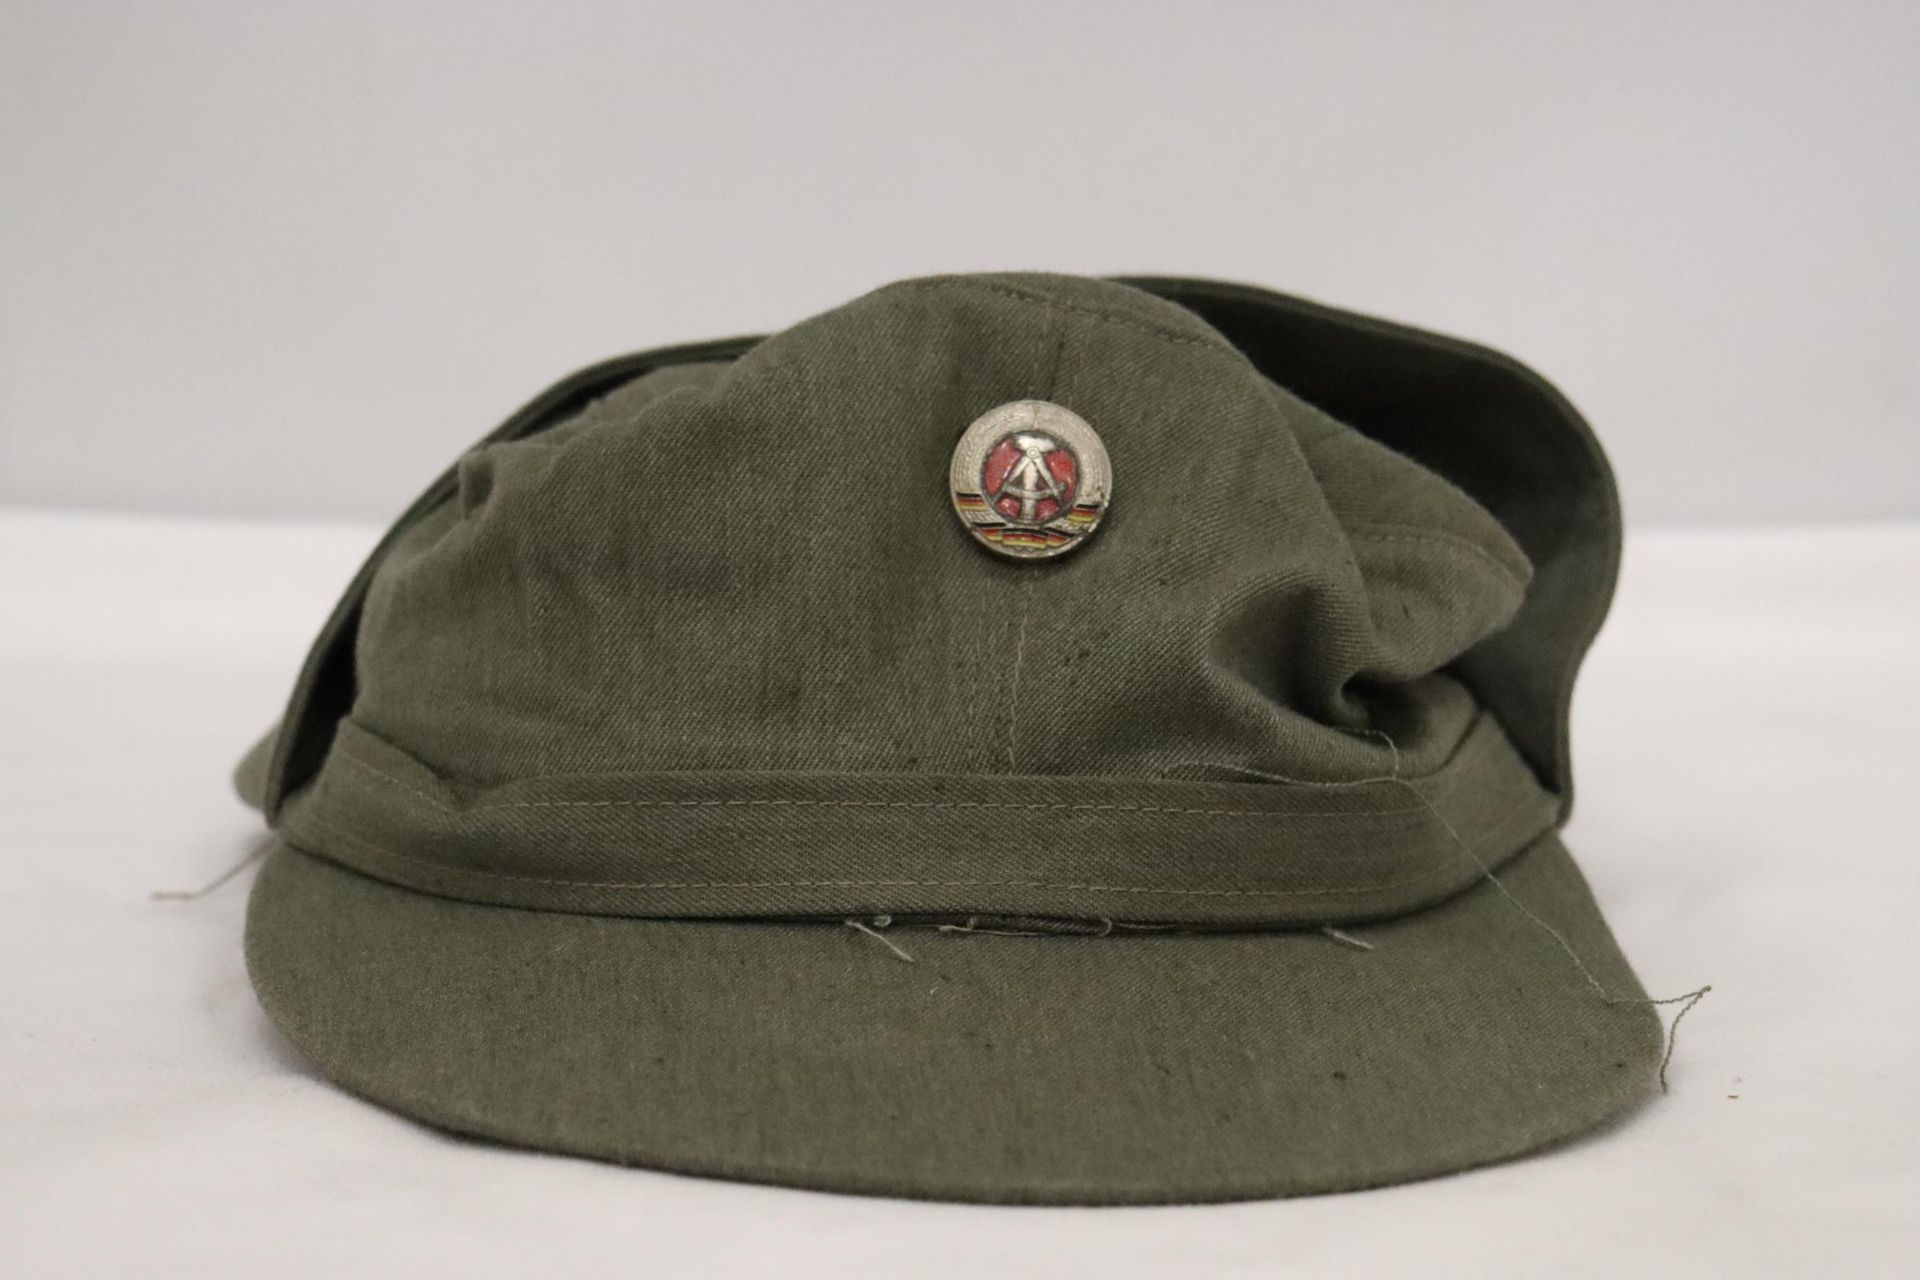 A 1950'S EAST GERMAN MILITARY CAP AND BADGE - Image 3 of 6